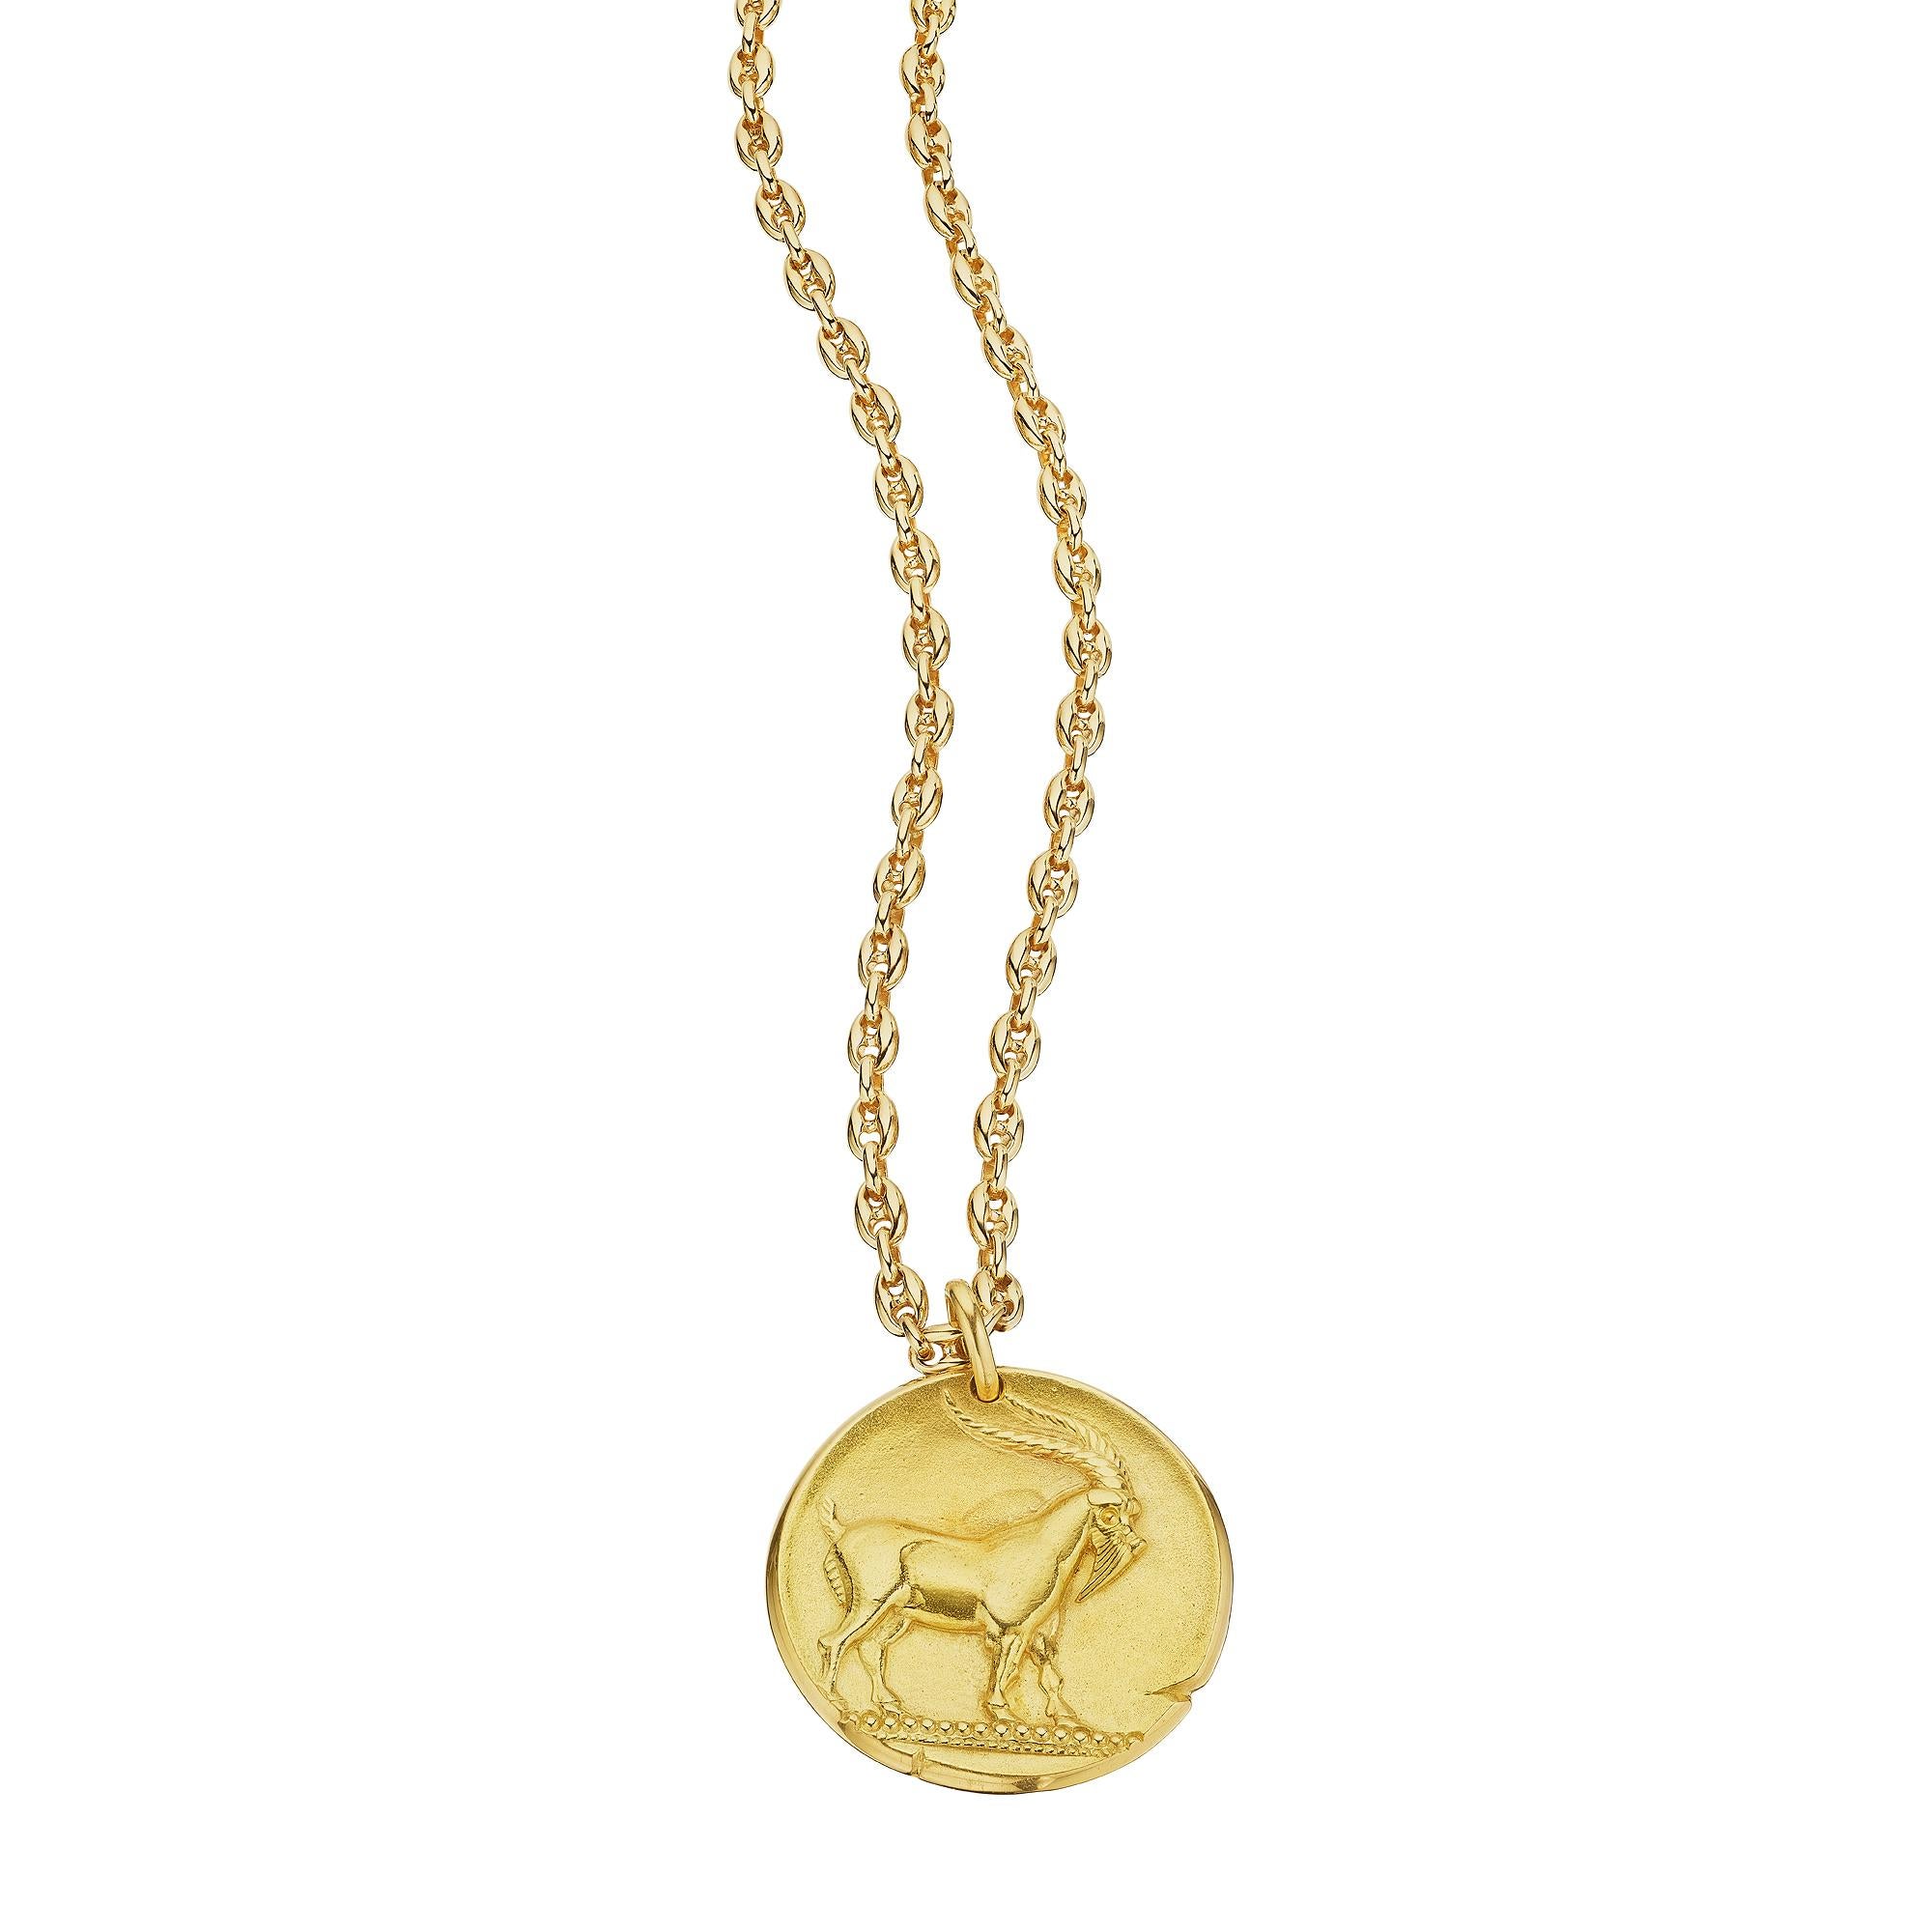 Just arrived and waiting for those born a Capricorn (December 22-January 19th) this large size coveted Van Cleef & Arpels Paris Georges L'Enfant vintage pendant zodiac charm will always feature your sign front and center. The 18 karat yellow gold